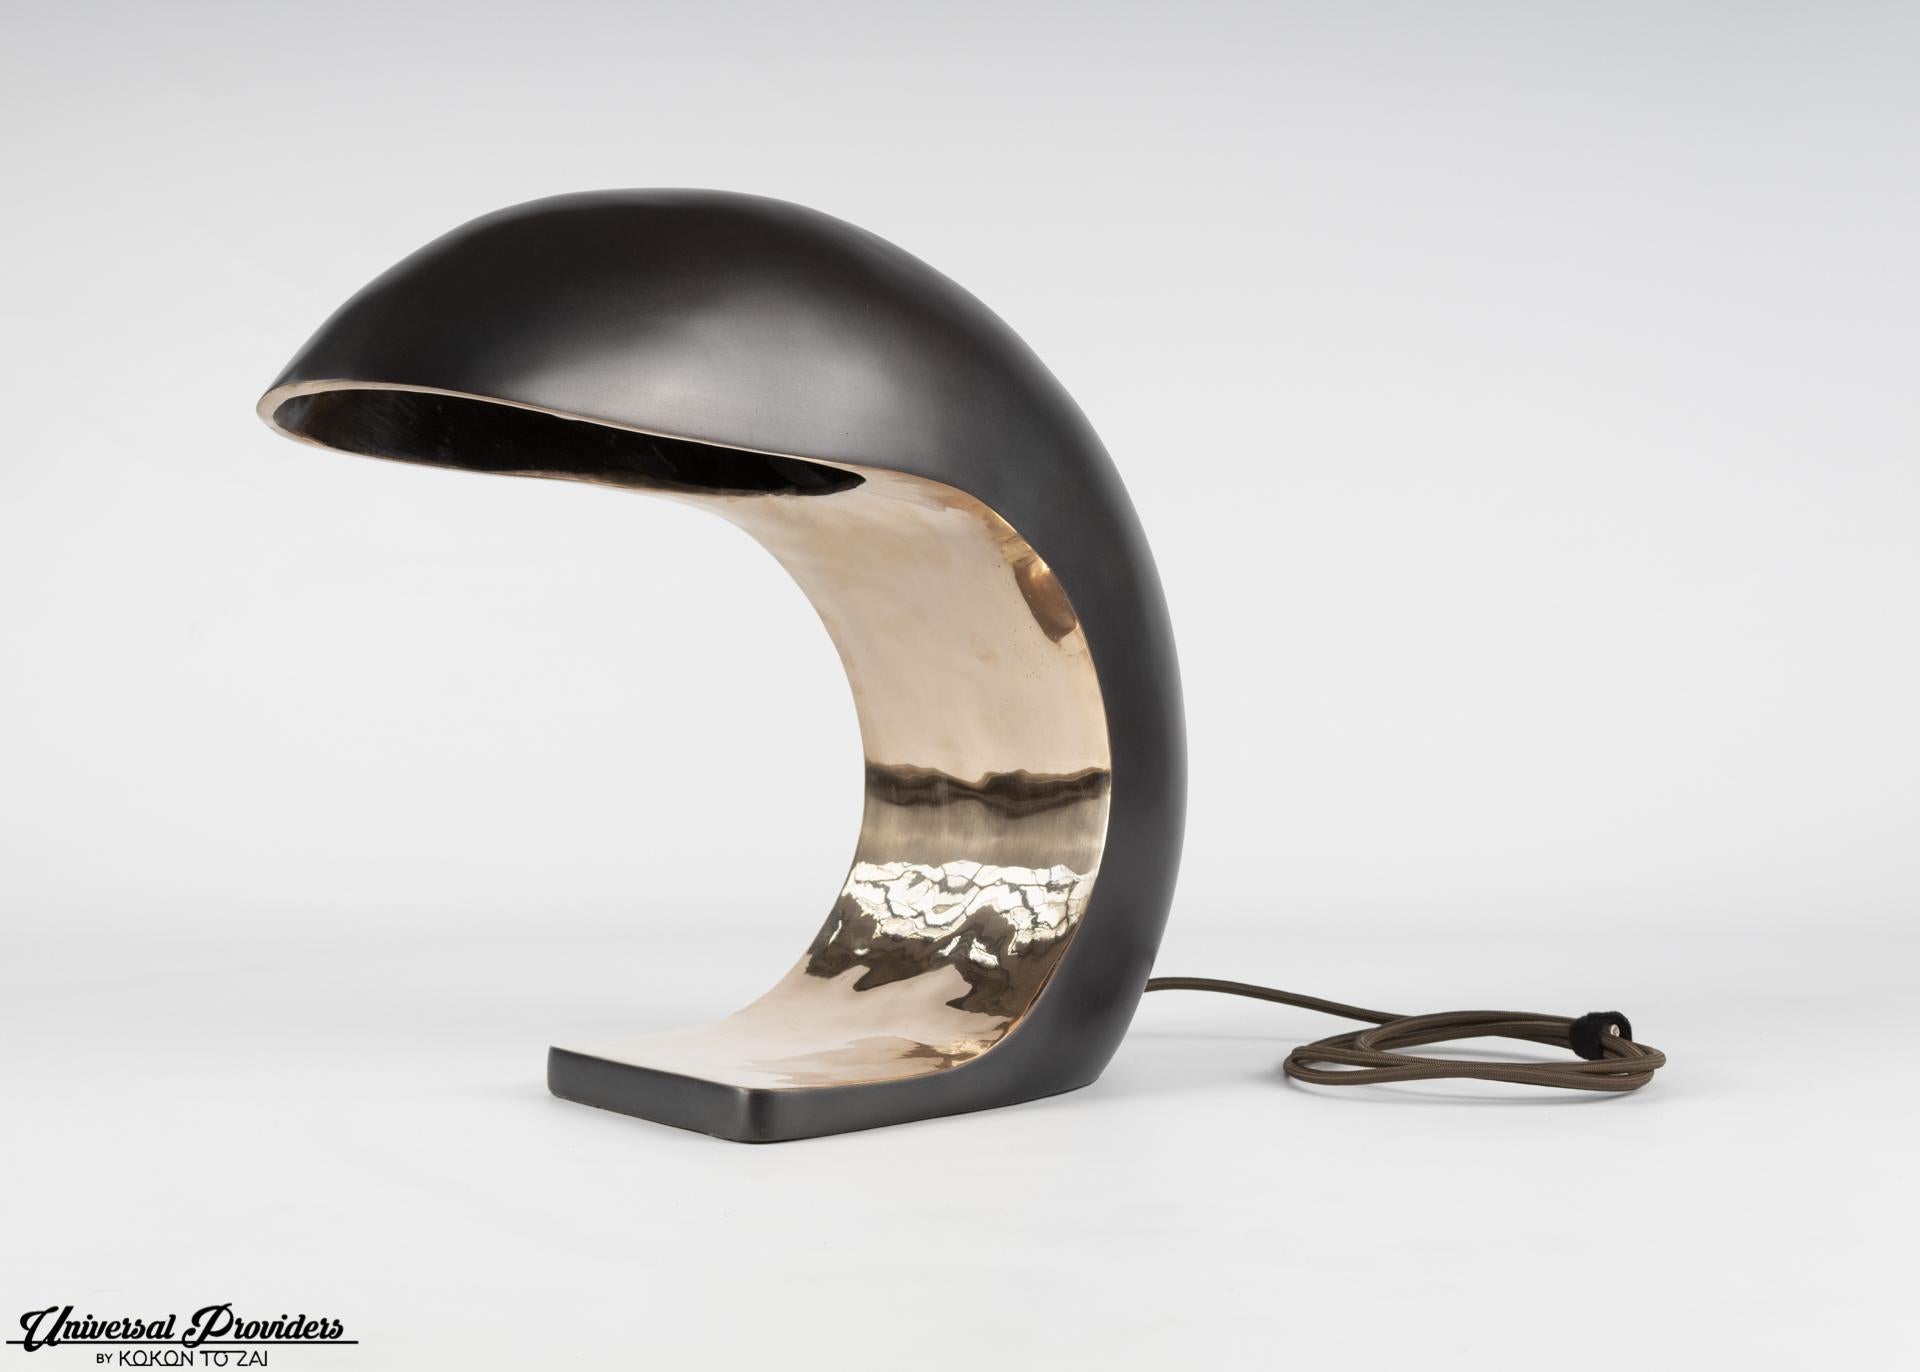 The Nautilus Study table lamp is inspired by midcentury Italian design. It is cast bronze and weighs up to 28 pounds. The outer shell has a blackened patina, and the face is high polished to a mirrored finish. The Nautilus illuminates by a three-way